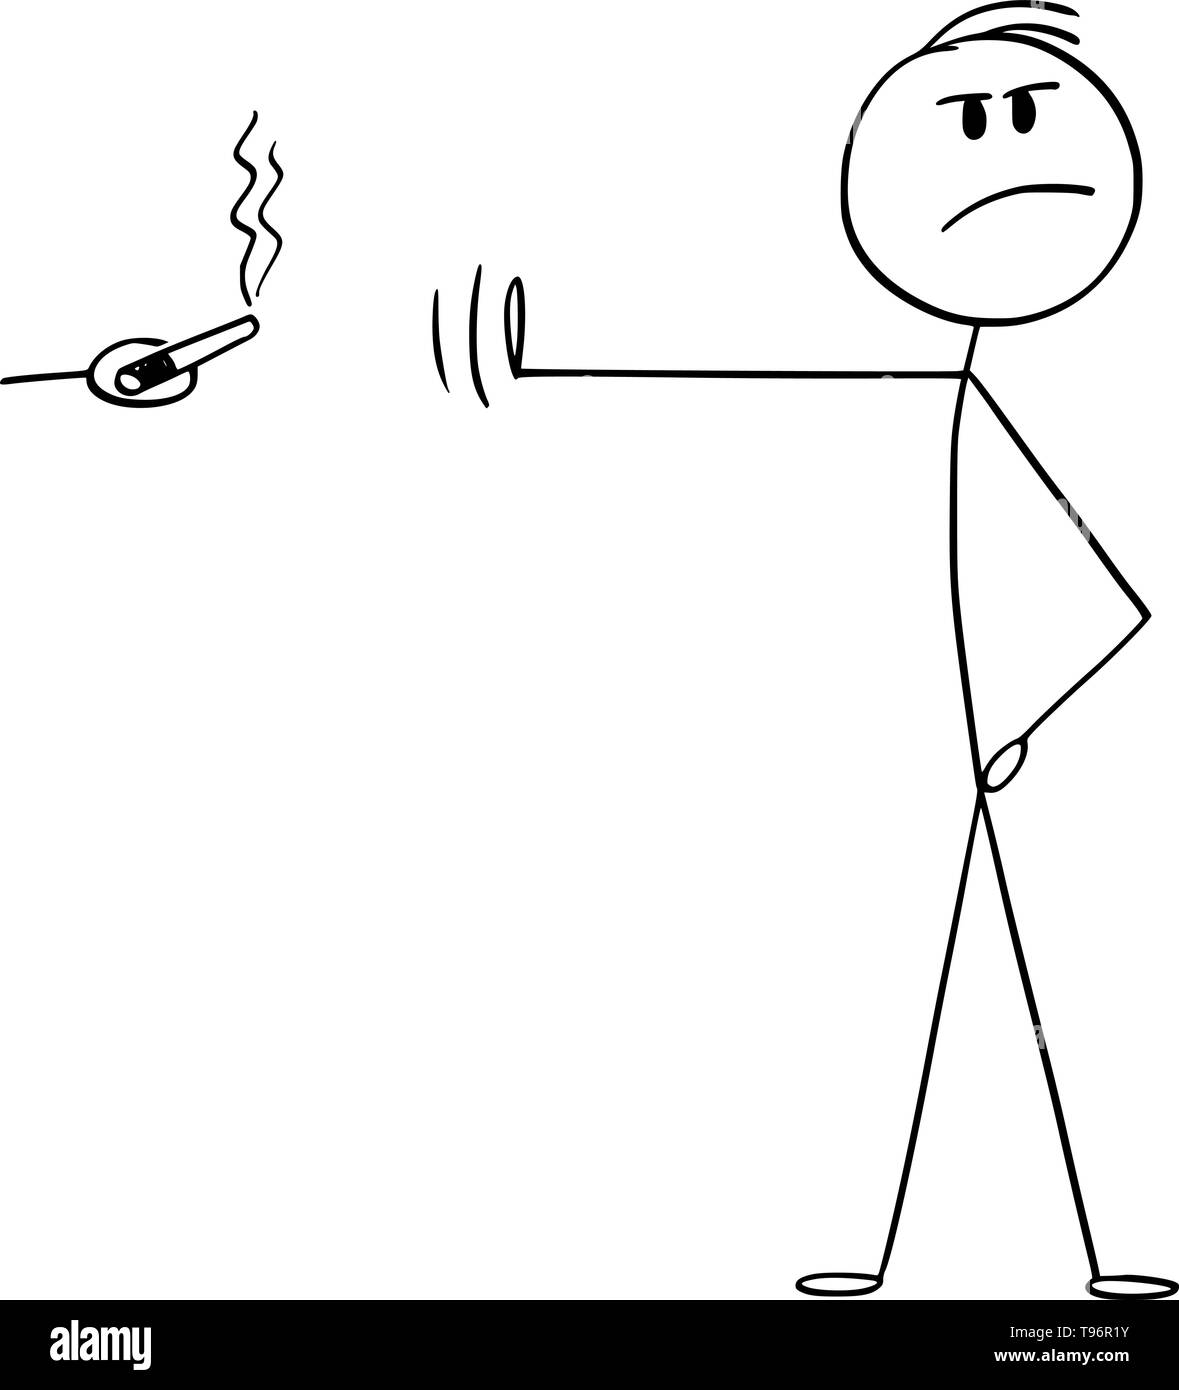 https://c8.alamy.com/comp/T96R1Y/vector-cartoon-stick-figure-drawing-conceptual-illustration-of-principled-or-high-principled-man-rejecting-smoking-cigar-or-cigarette-with-hand-gesture-and-pose-T96R1Y.jpg